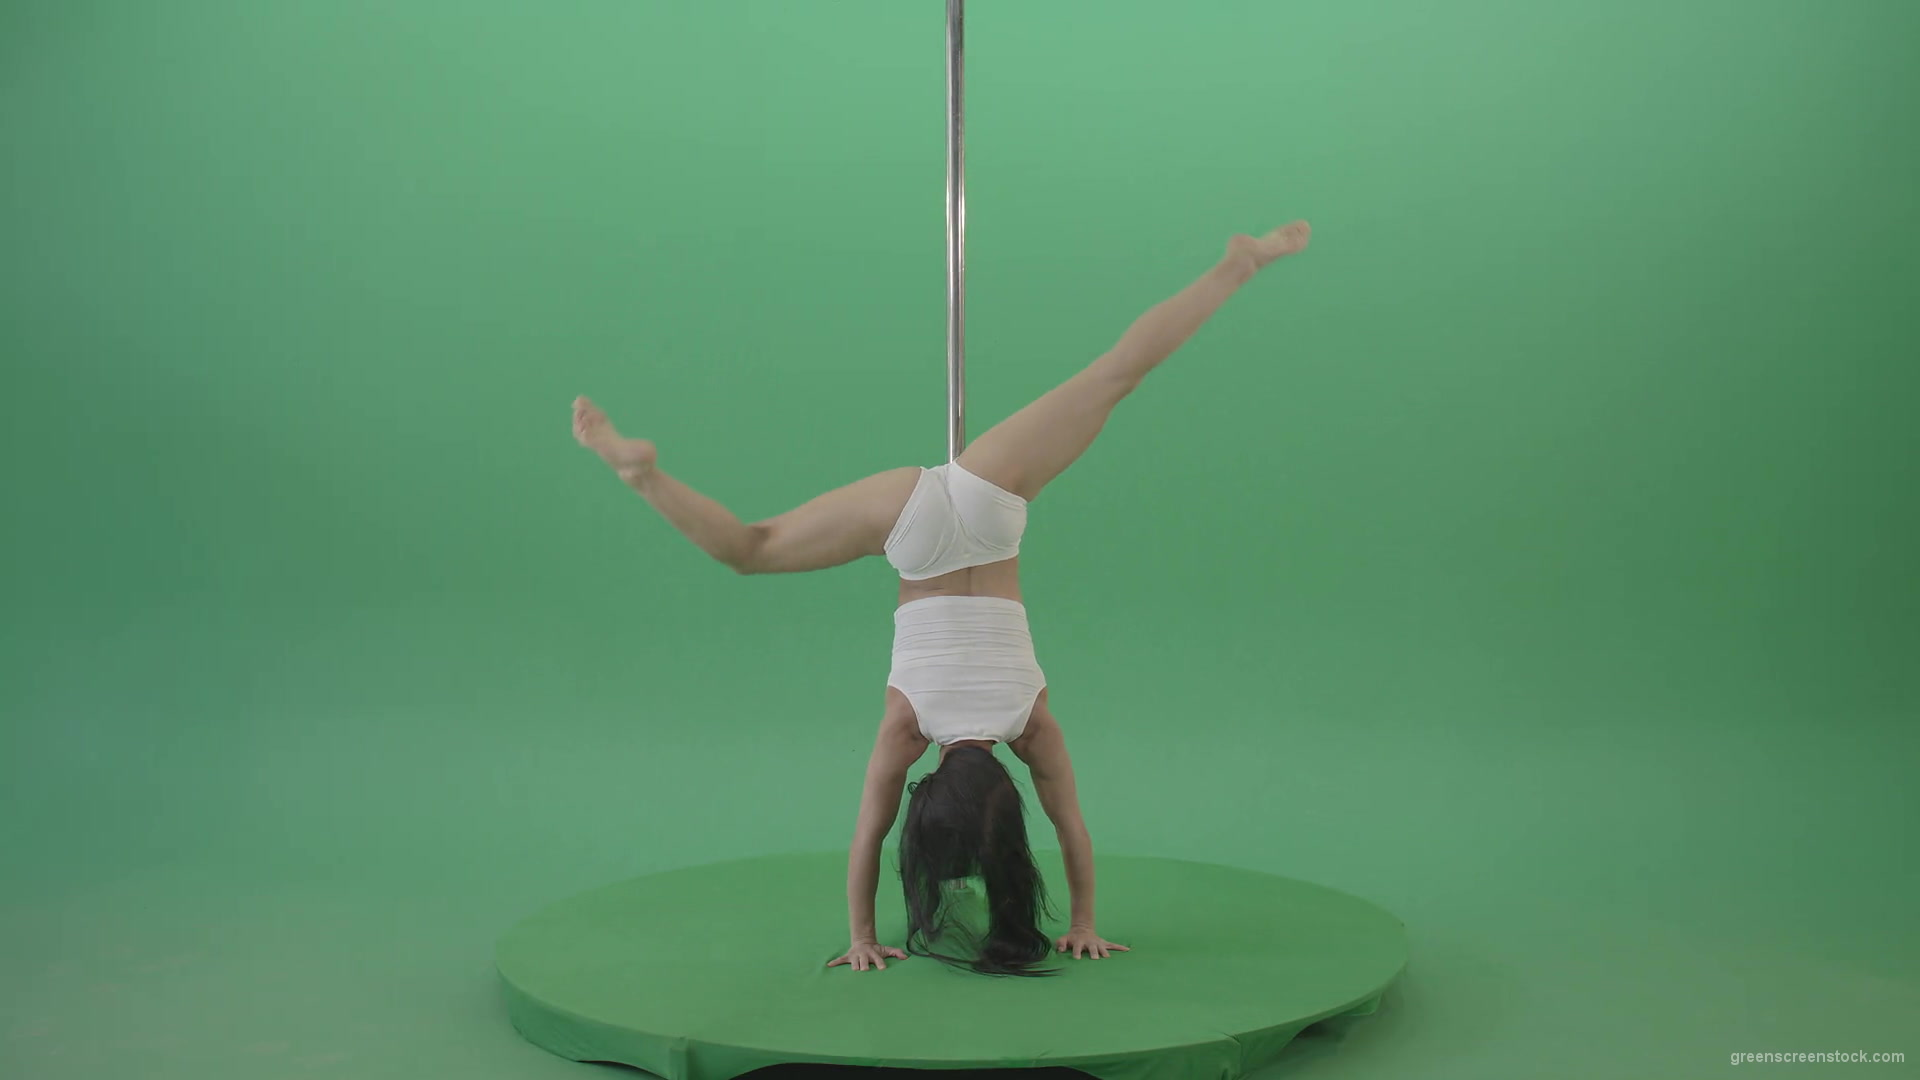 Pole-Dance-Girl-waving-two-legs-isolated-on-green-screen-4K-Video-Footage-1920_004 Green Screen Stock